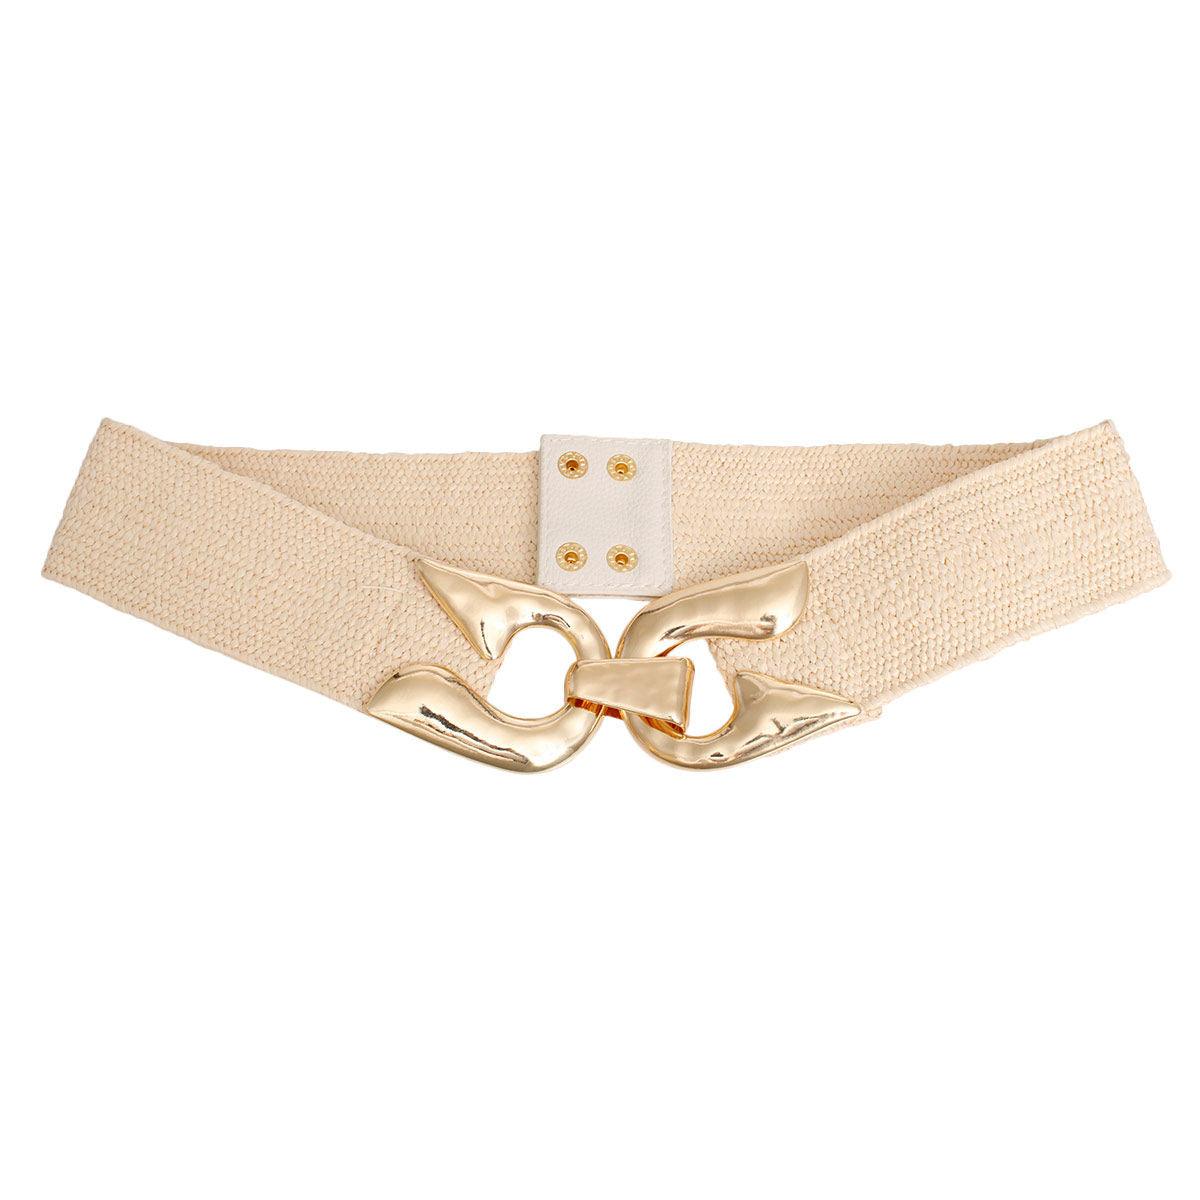 Ivory Color Raffia Belt with Gold Horseshoe Buckle for Women